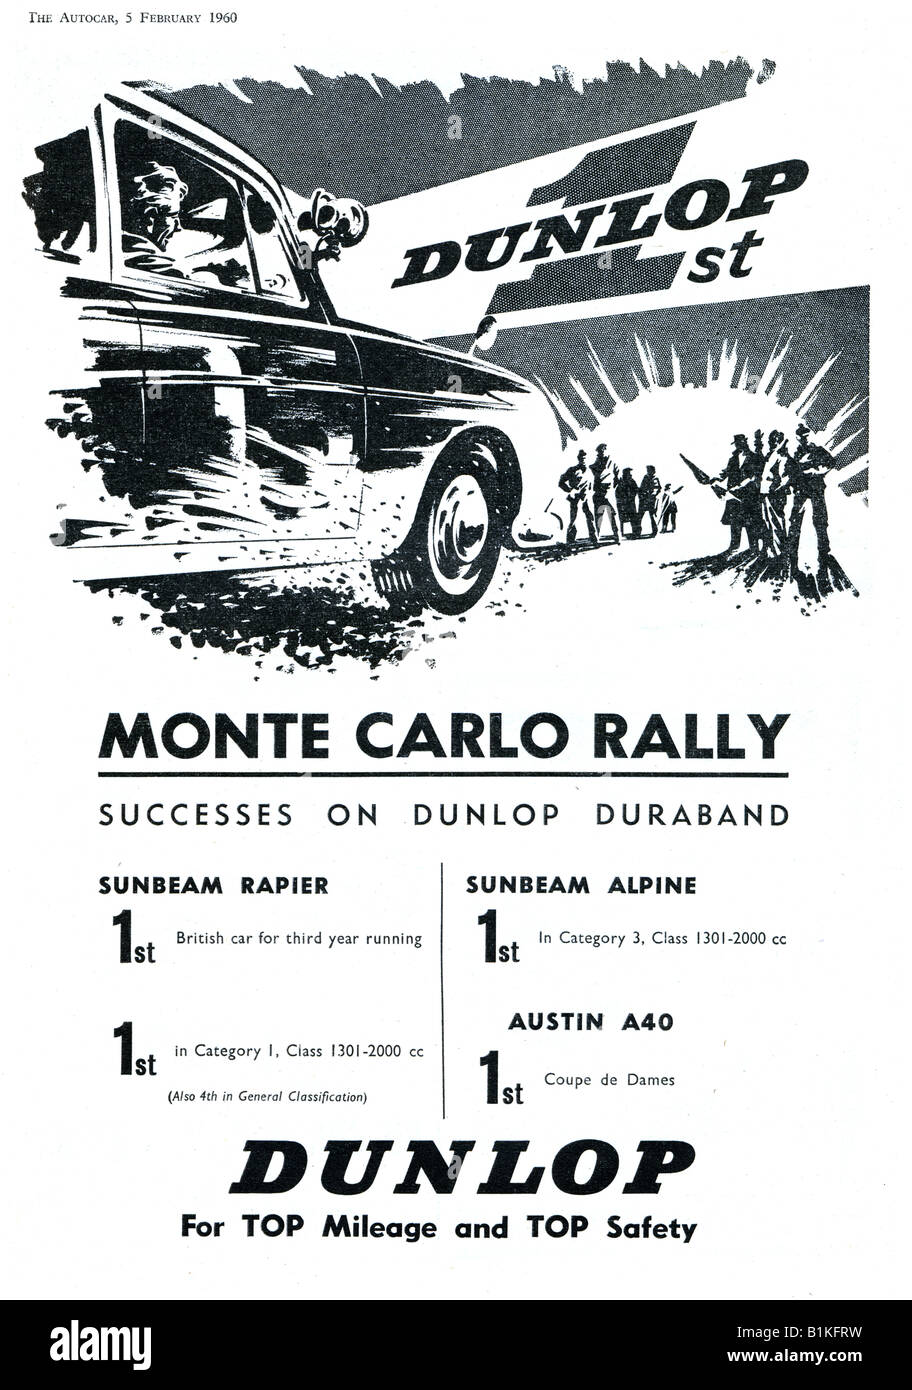 1960 advertisement for Dunlop Tyres Tires success in the 1960 Monte Carlo Rally Rallye FOR EDITORIAL USE ONLY Stock Photo